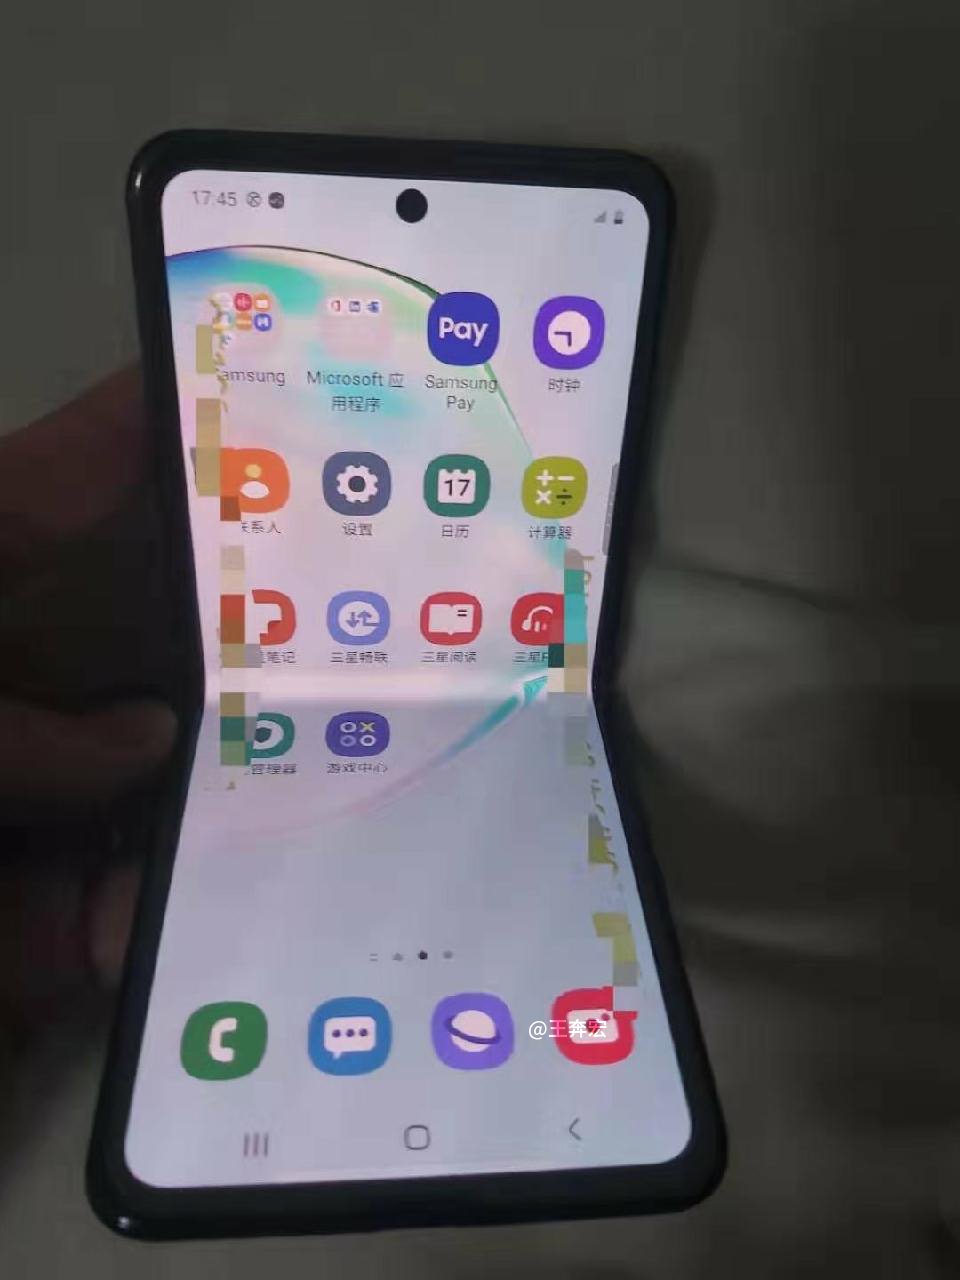 samsung clamshell foldable phone february 2020 release rumour 1